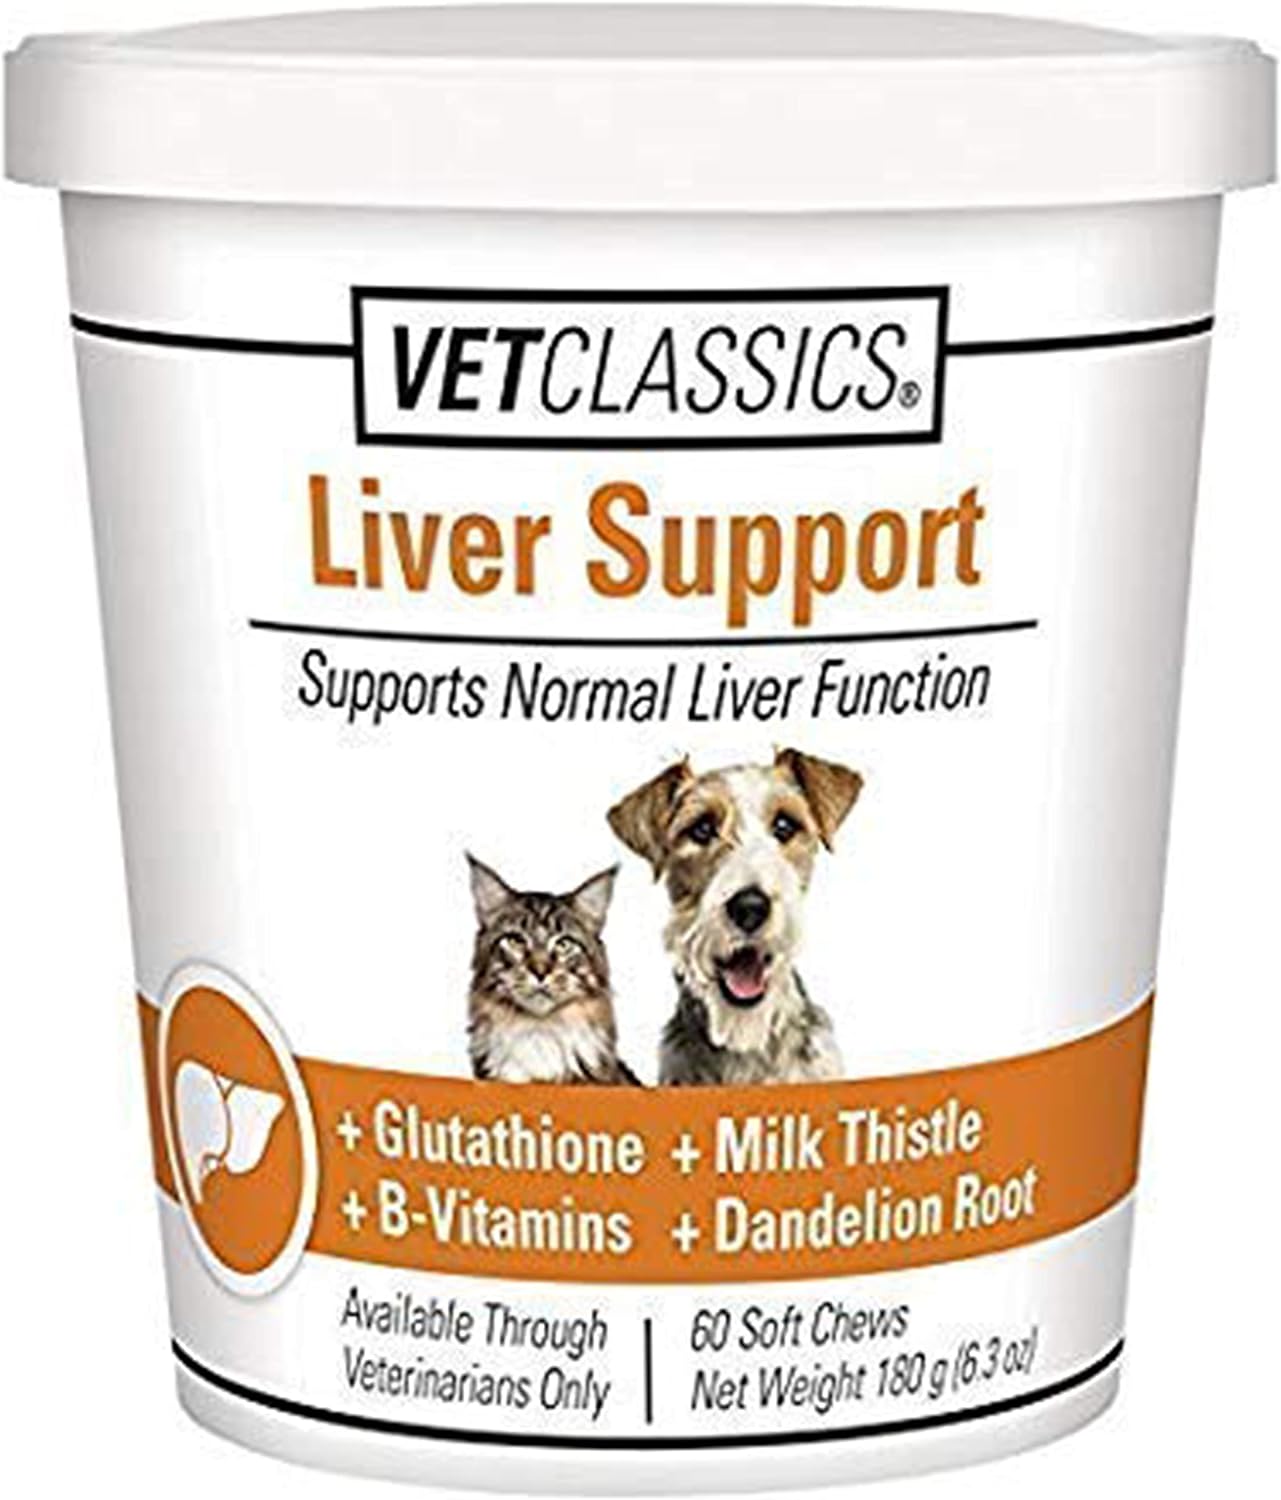 Vet Classics Liver Support Pet Health Supplement for Dogs, Cats – Liver Functions – B-Vitamins, Glutathione, Milk Thistle – Soft Tablets, Chews – 60 Soft Chews